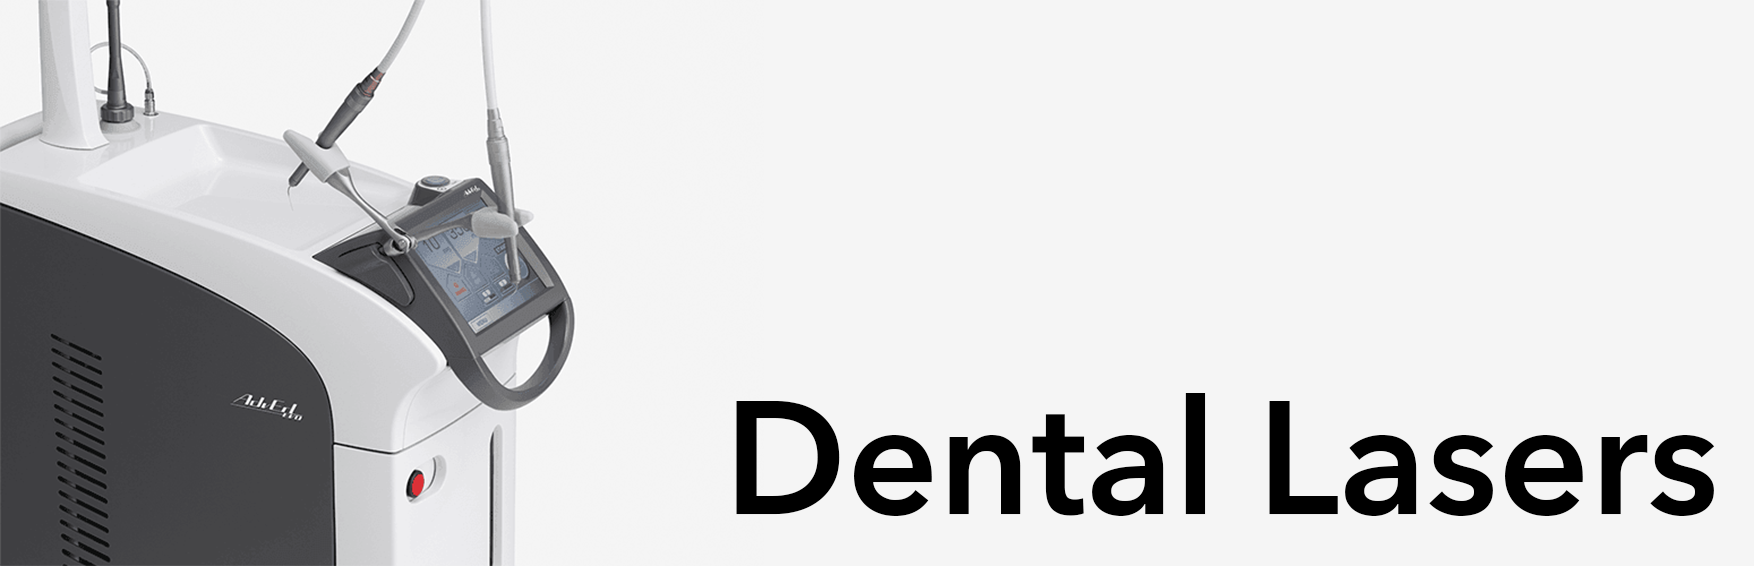 Dental lasers offered by Dental TI.